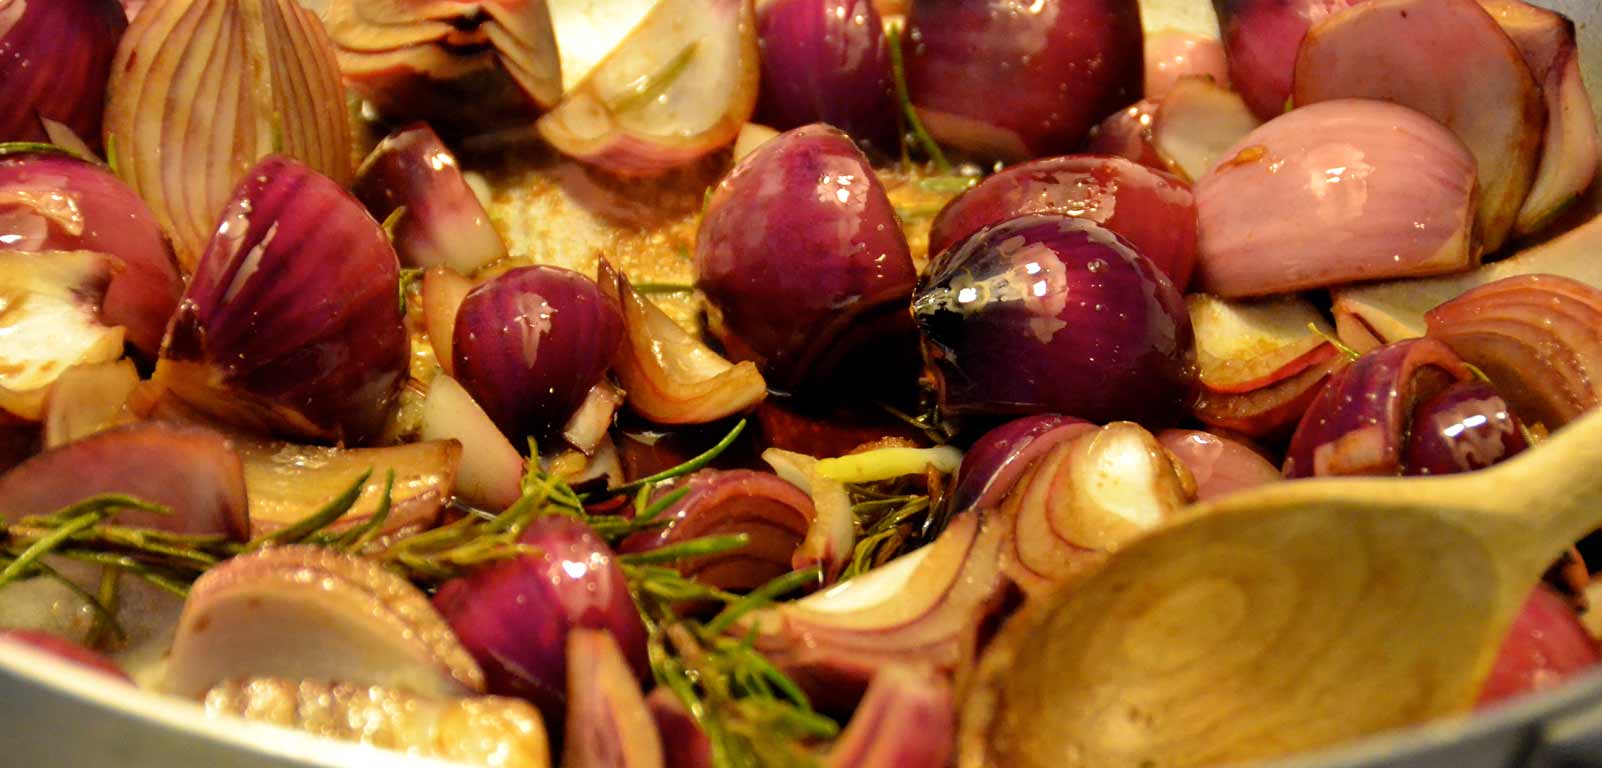 BRAISED ONIONS WITH BALSAMIC AND ROSEMARY